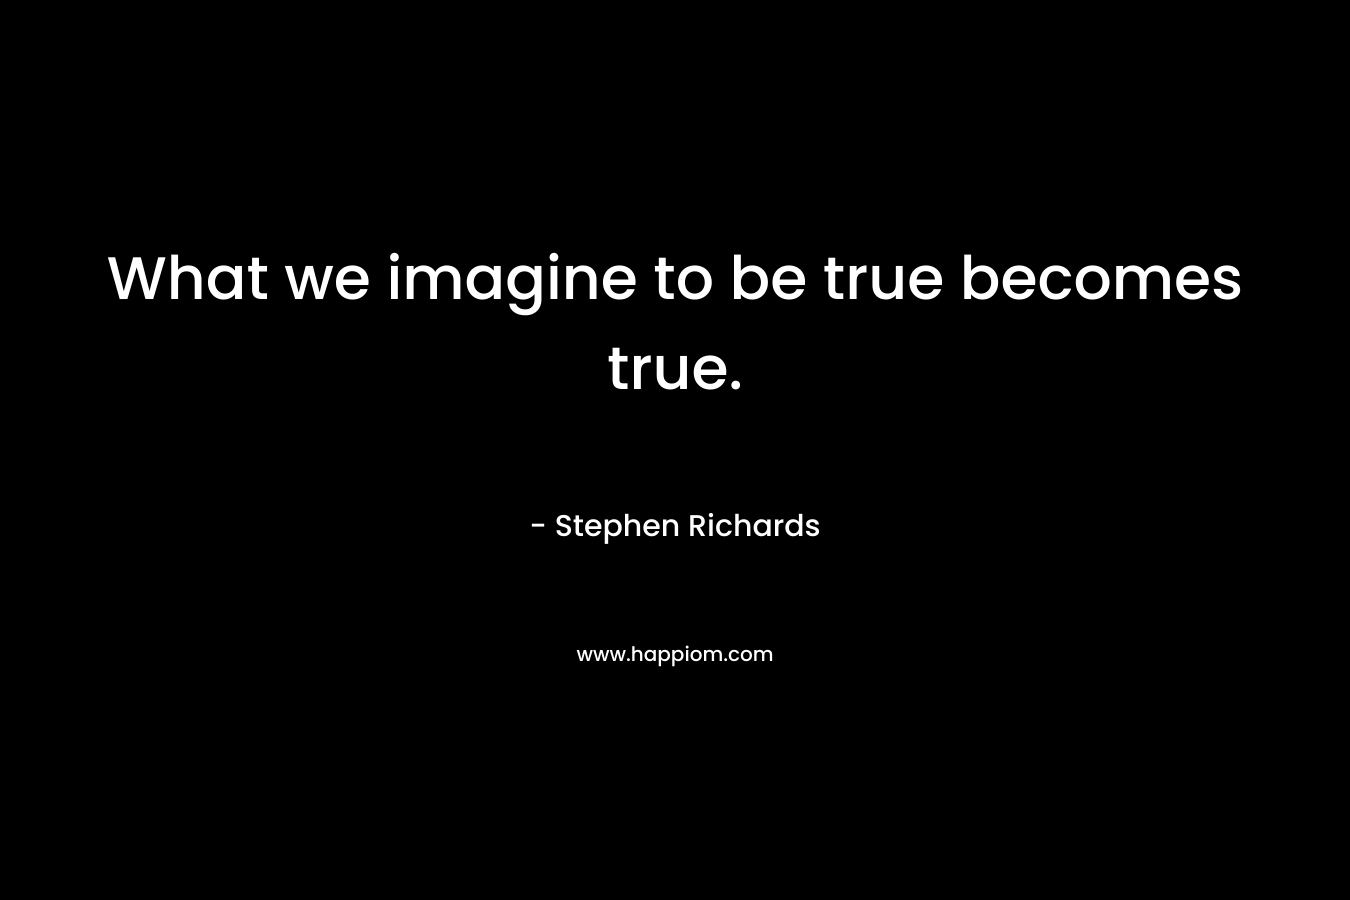 What we imagine to be true becomes true.